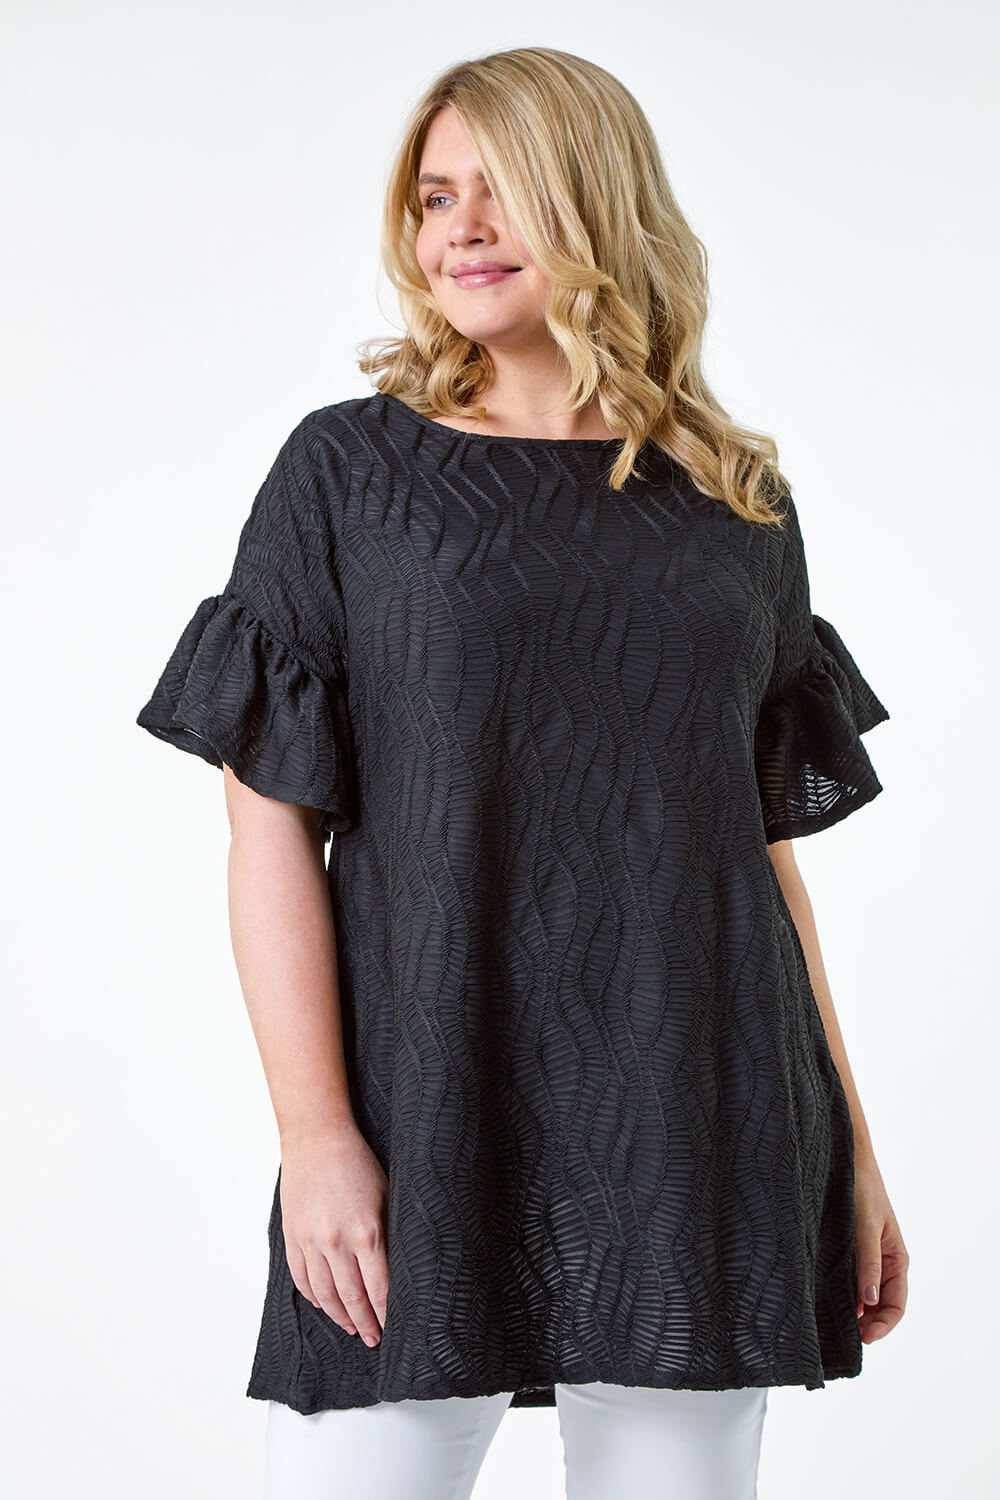 Black Curve Textured Frill Detail Stretch T-Shirt, Image 4 of 5